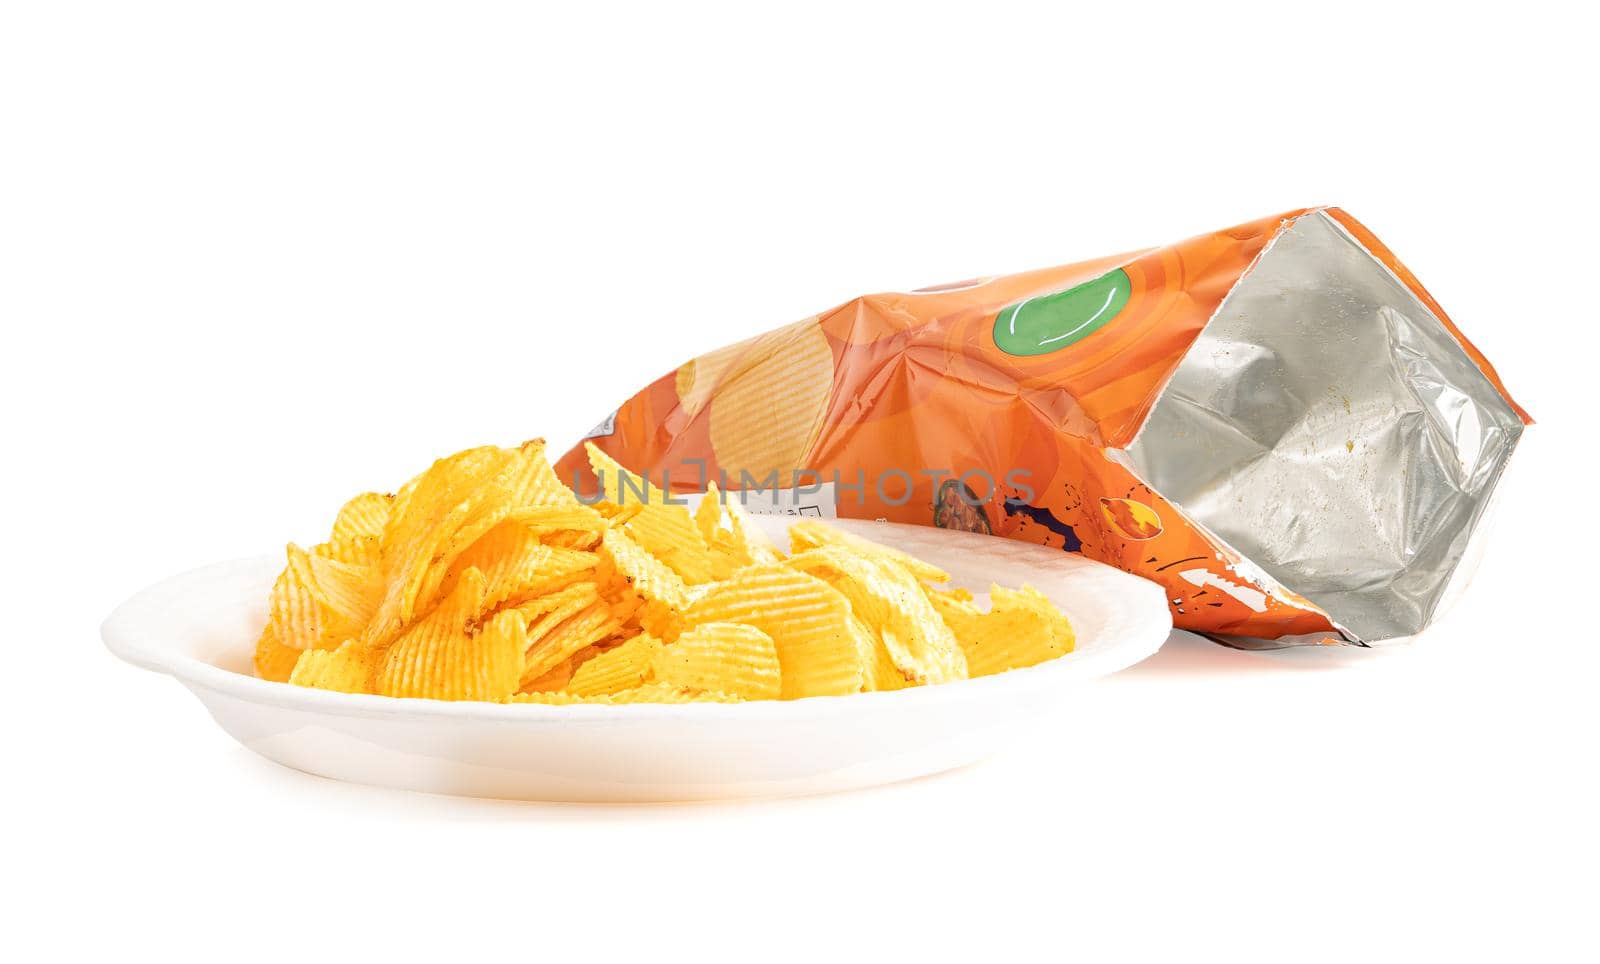 Potato chips, delicious BBQ seasoning spicy for crips, thin slice deep fried snack fast food with open bag.